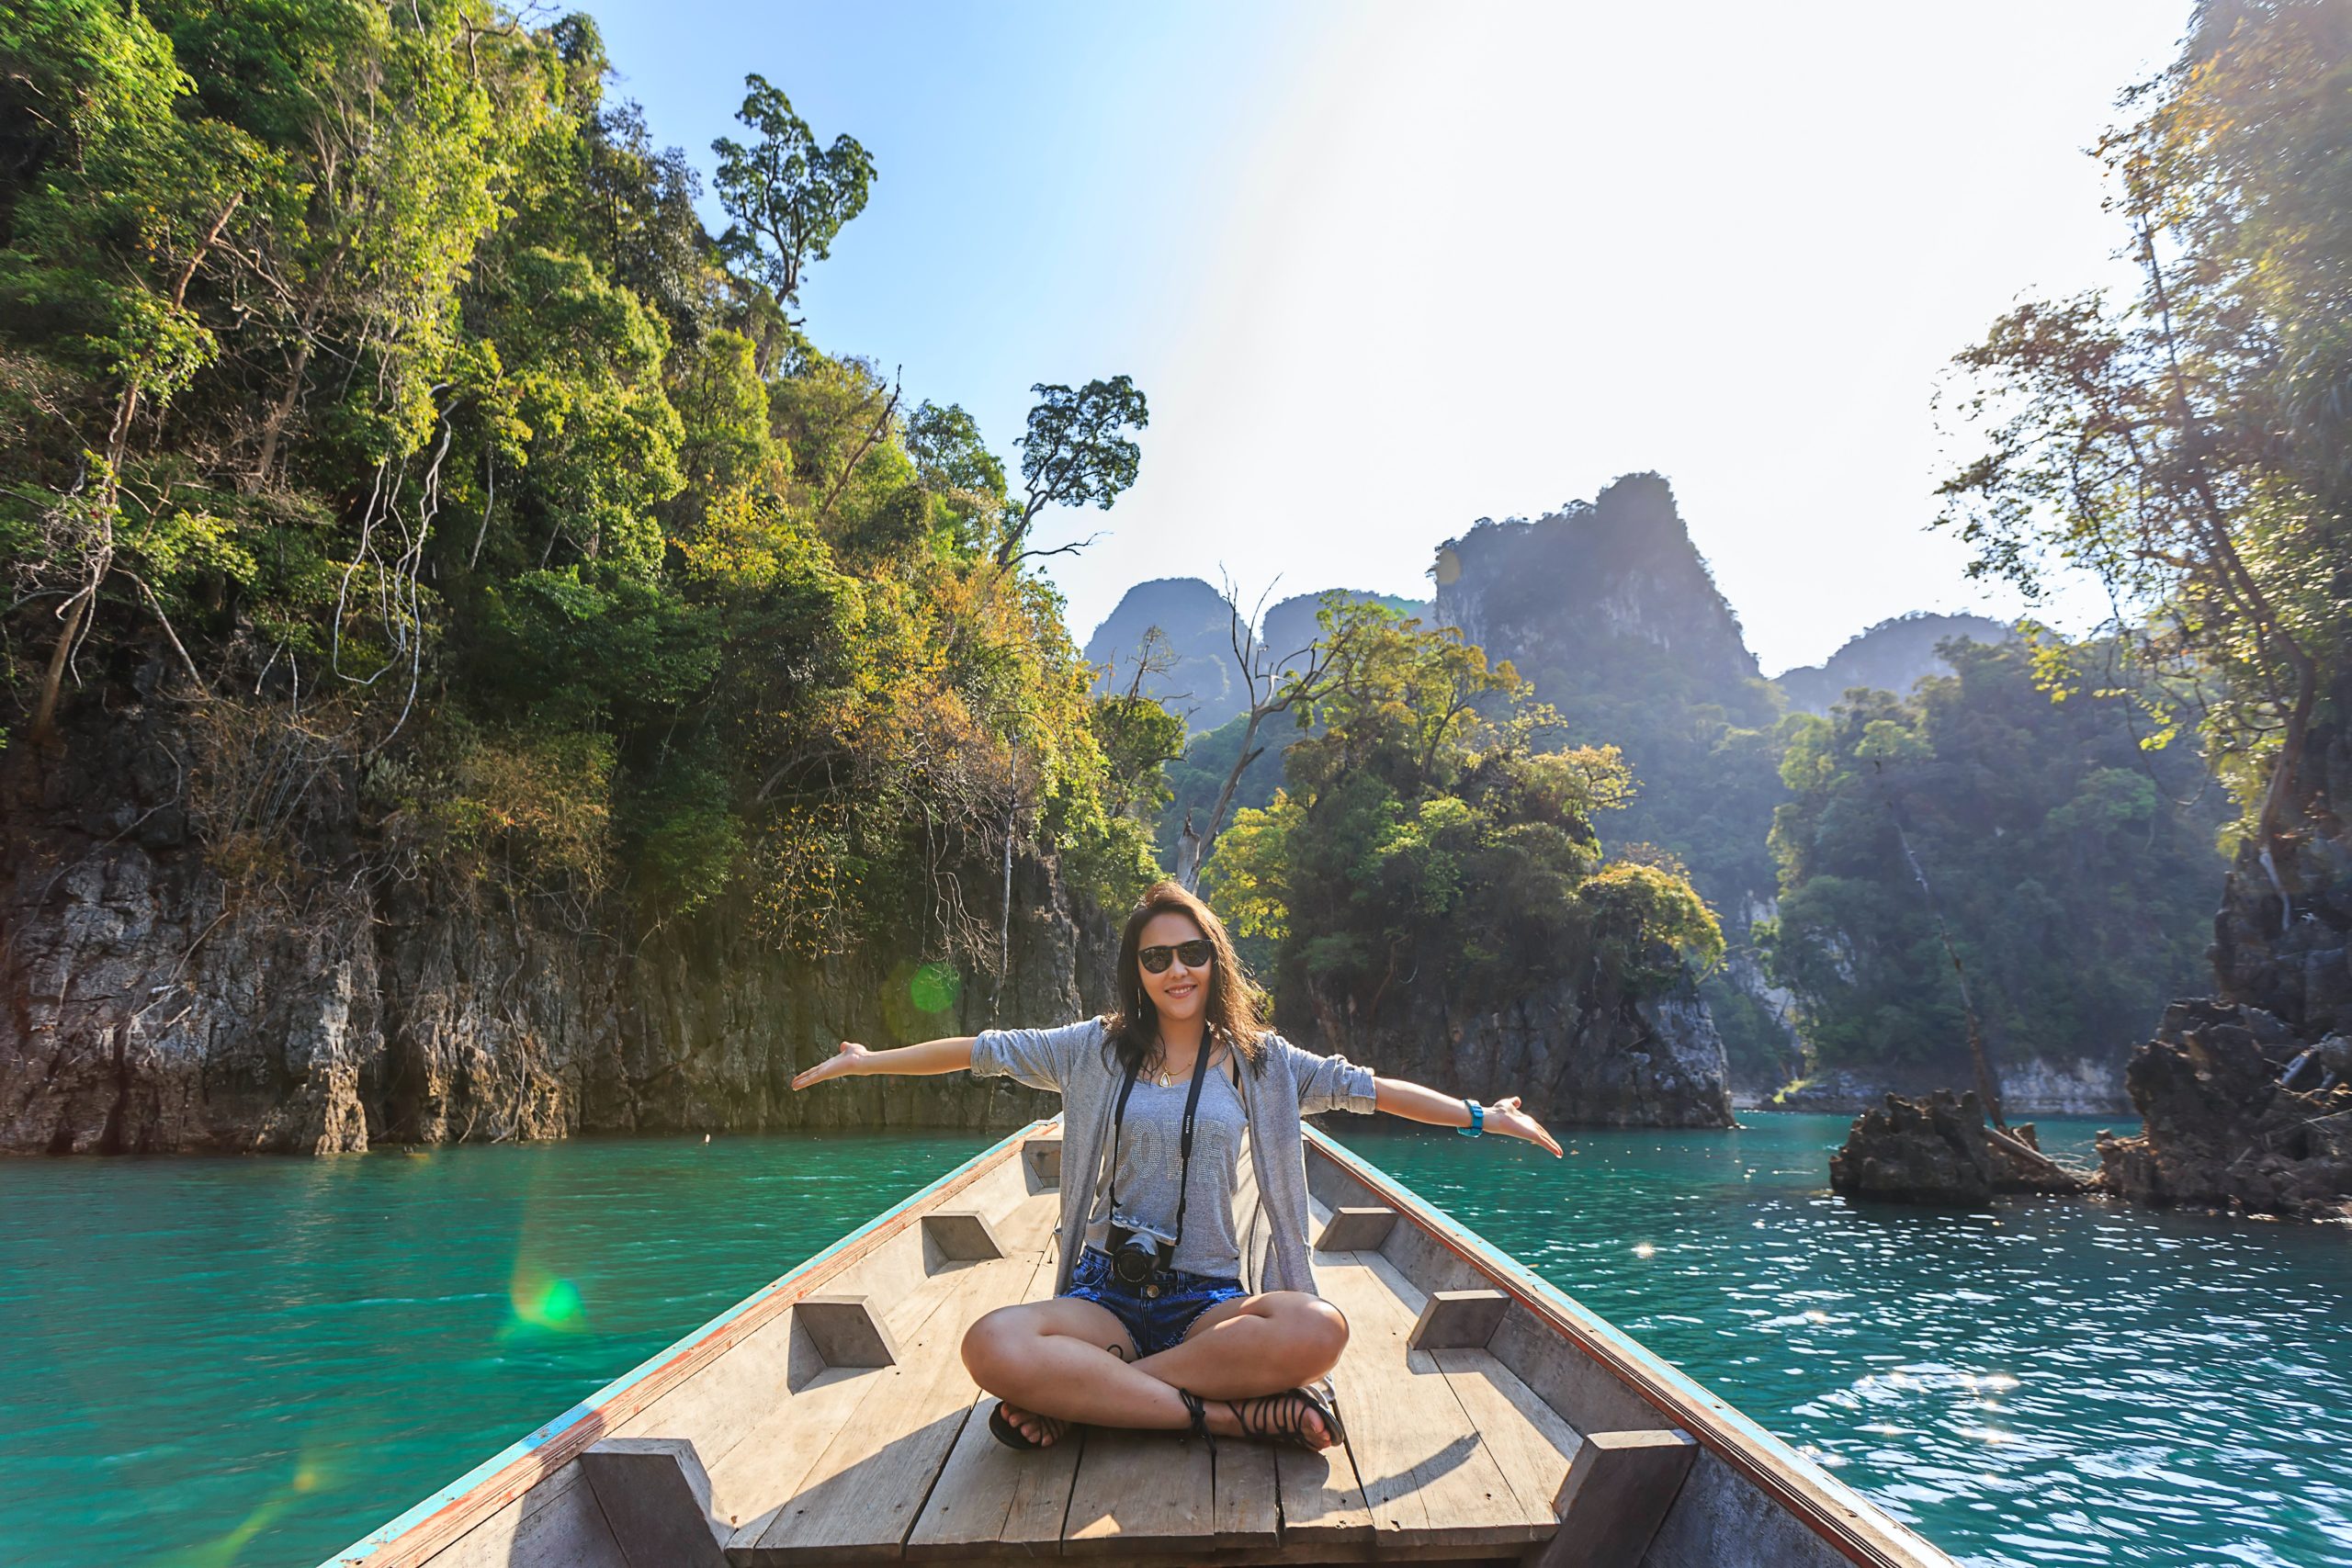 Tourist in sunglasses sits on a boat in Thailand surrounded by trees and nature